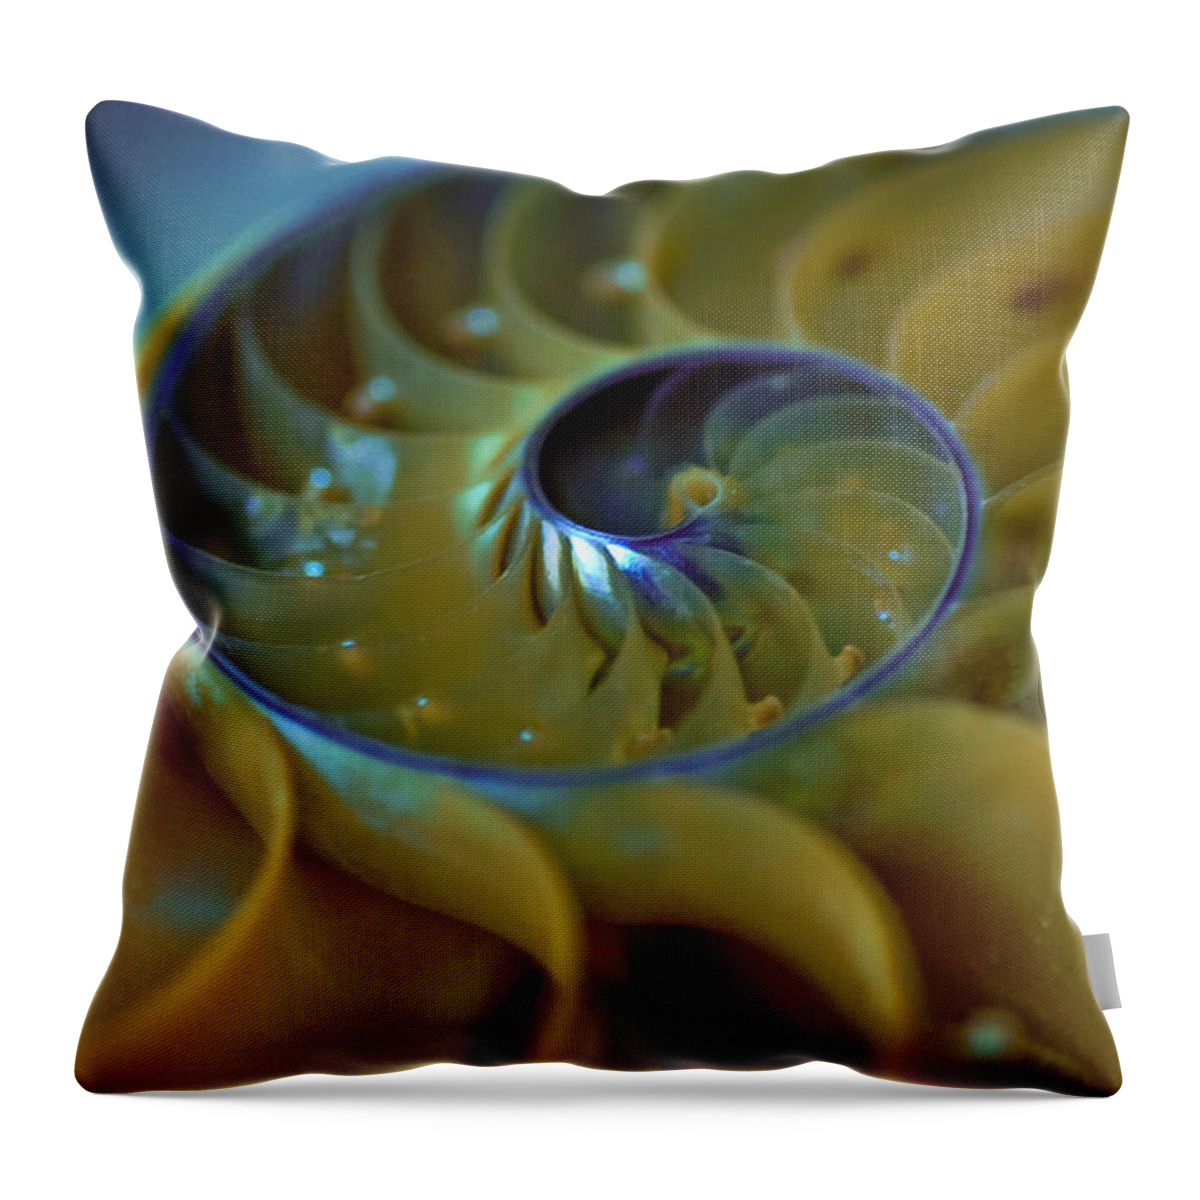 Underwater Throw Pillow featuring the photograph Nautilus by By Ken Ilio